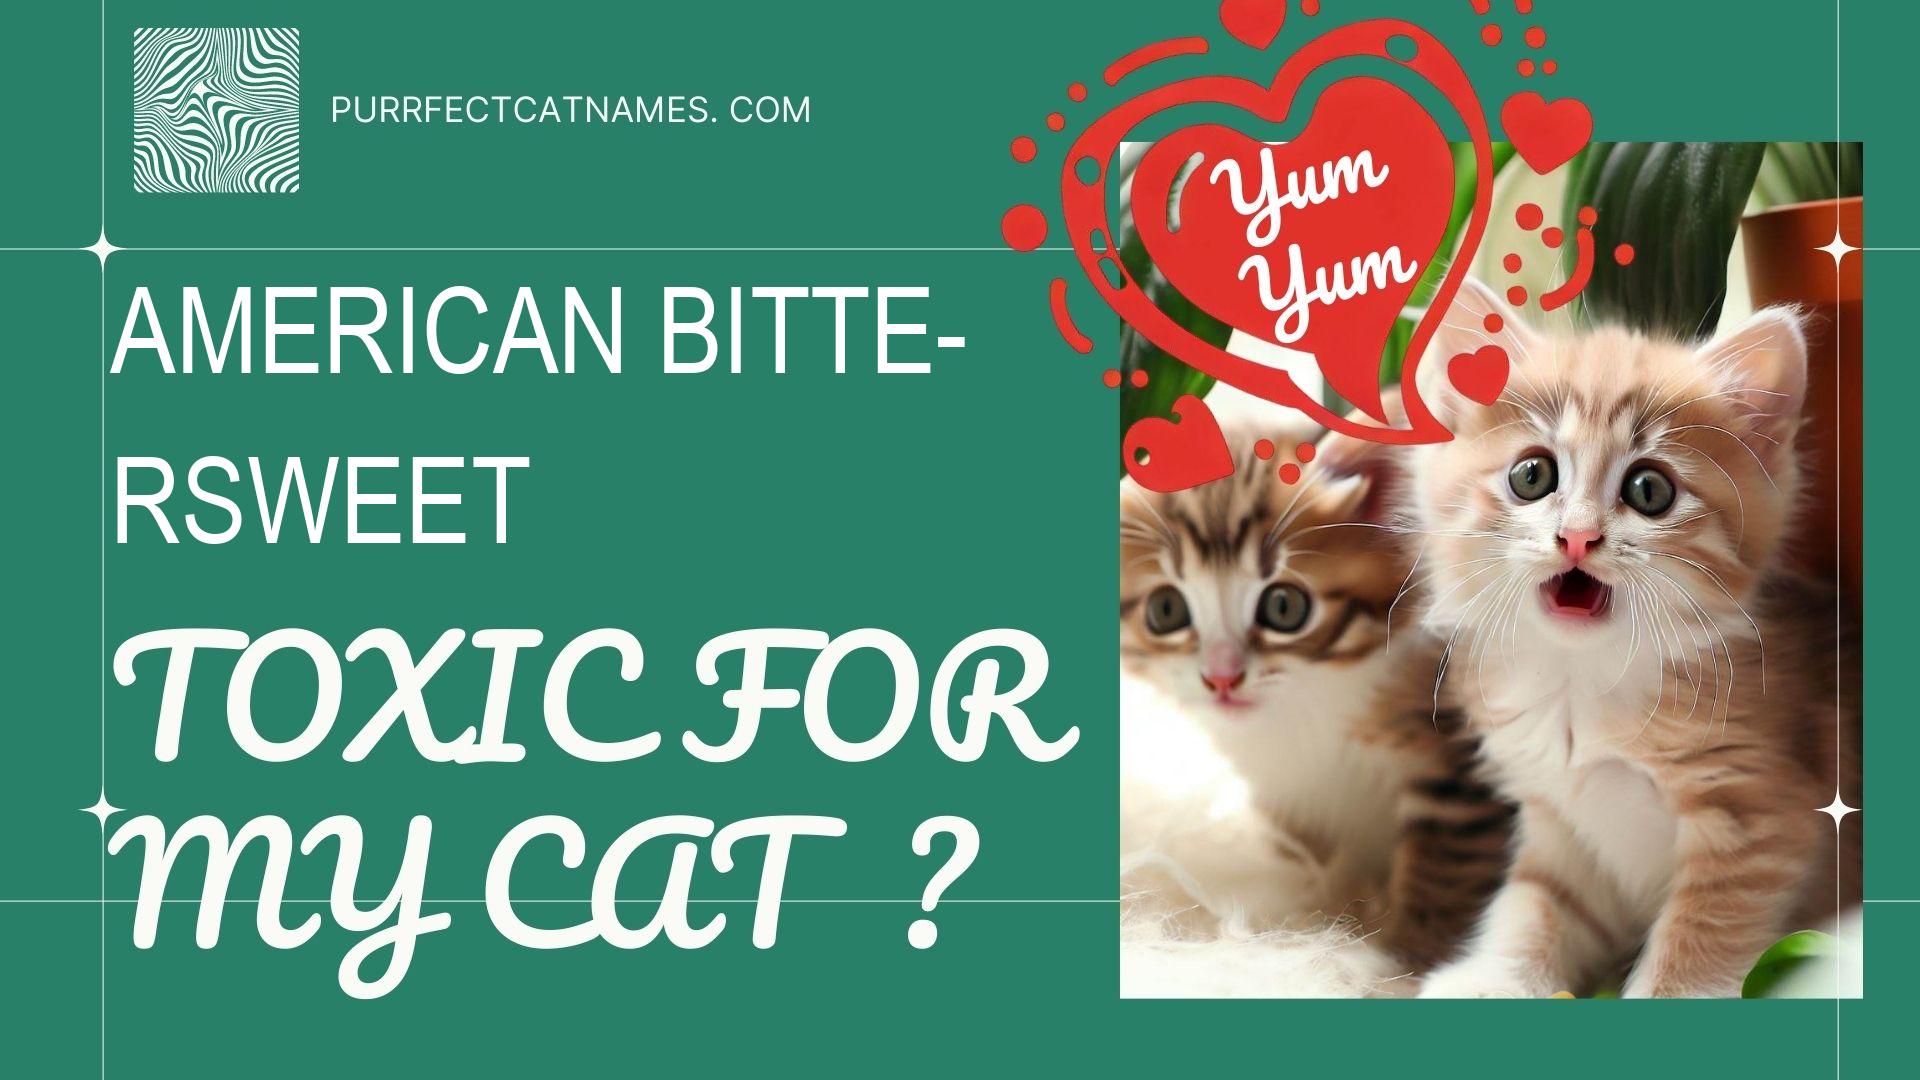 IsAmerican Bittersweet plant toxic for your cat